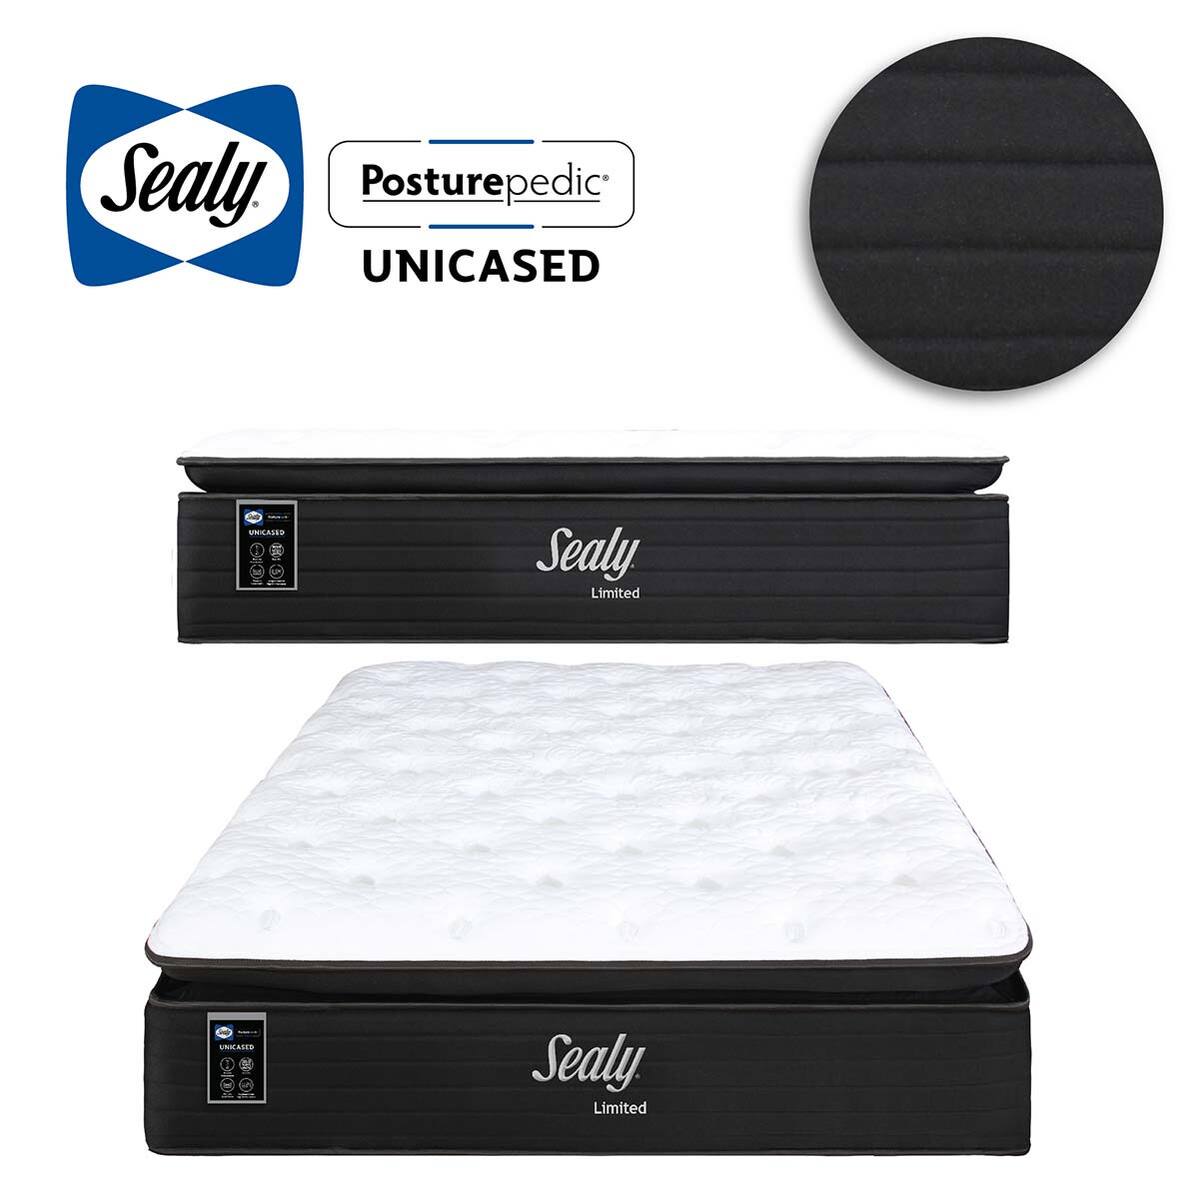 Sealy, Colchón y Box King Size, Limited